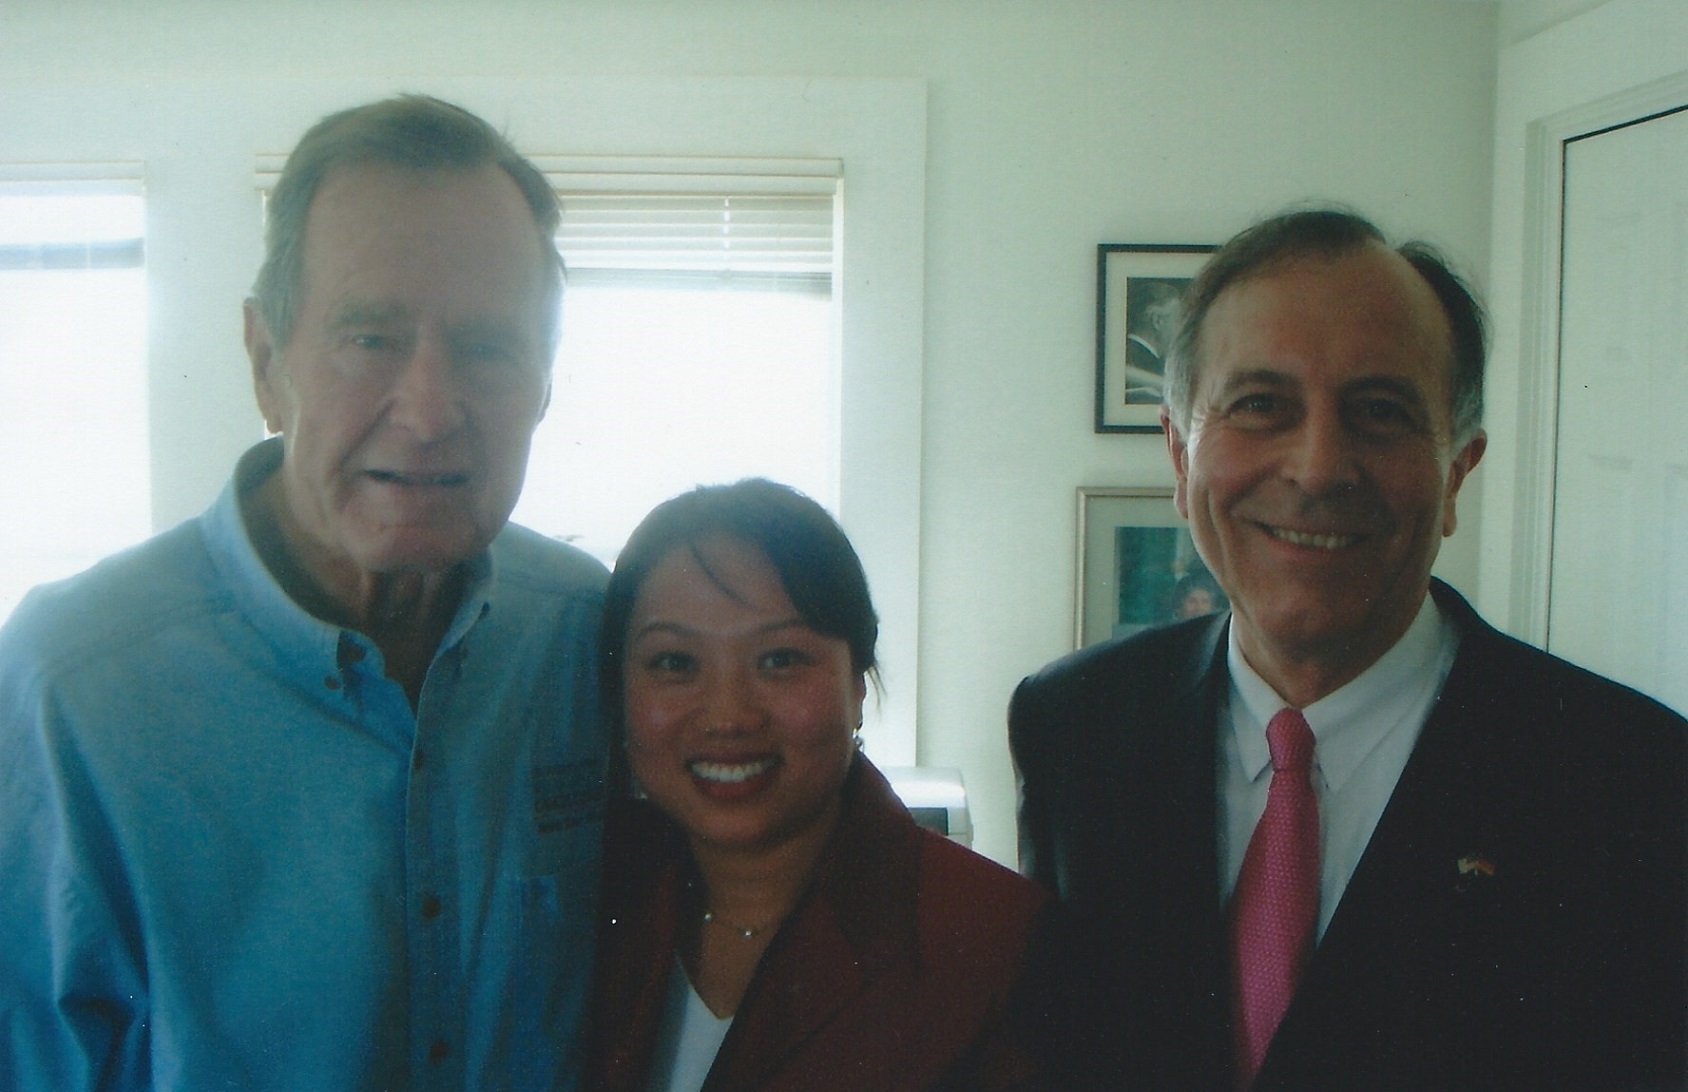 German Consul General of Boston Friedrich Lohr and wife Angela summoned my services for a diplomatic visit to the G.H.W. Bush compound, Kennebunkport,Me.